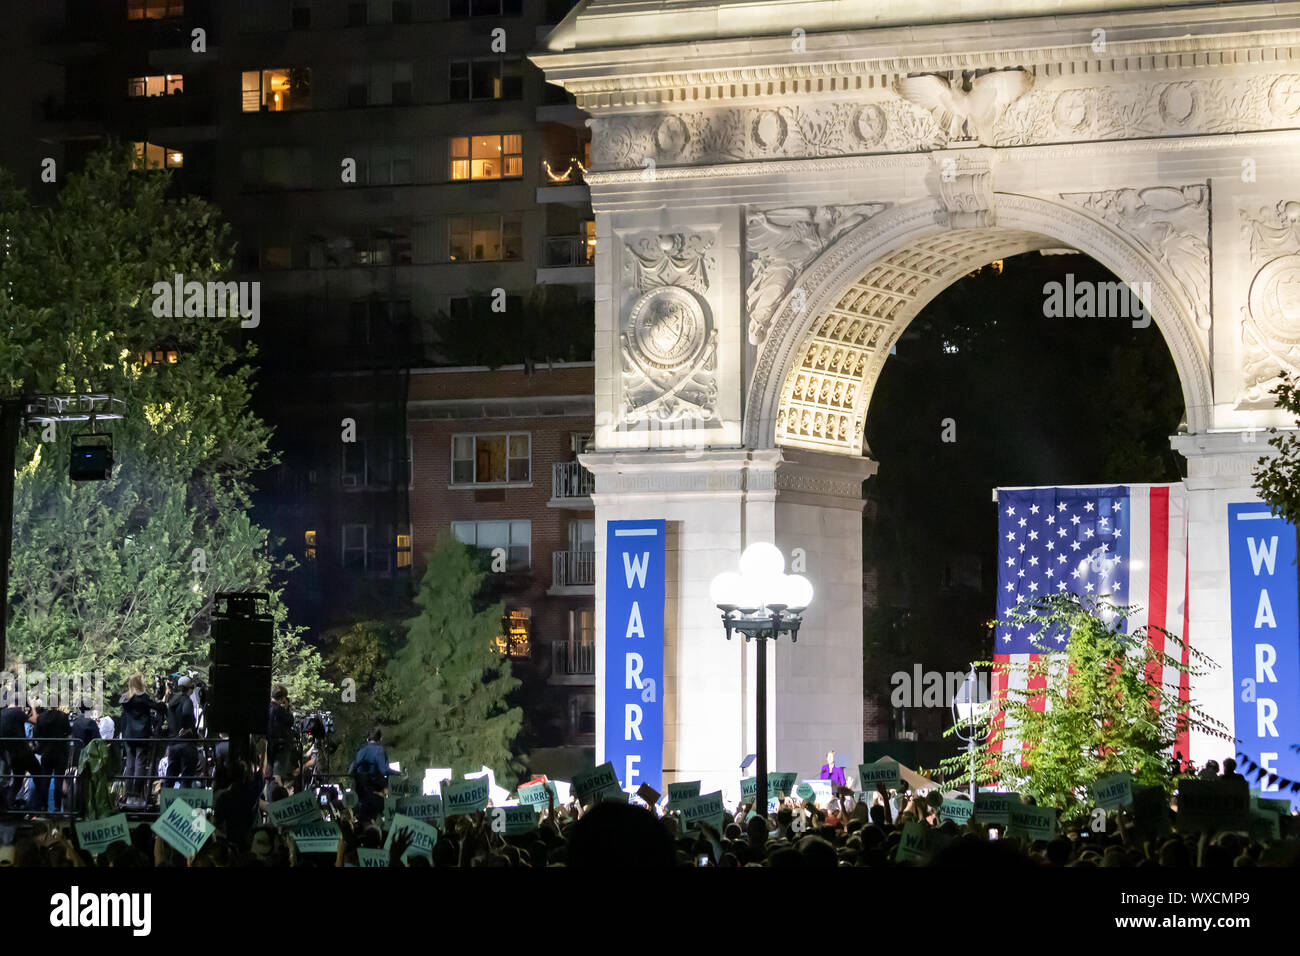 NEW YORK CITY September 2019: Senator Elizabeth Warren speaks to a crowd of people at a presidential campaign rally in Washington Square Park. Stock Photo